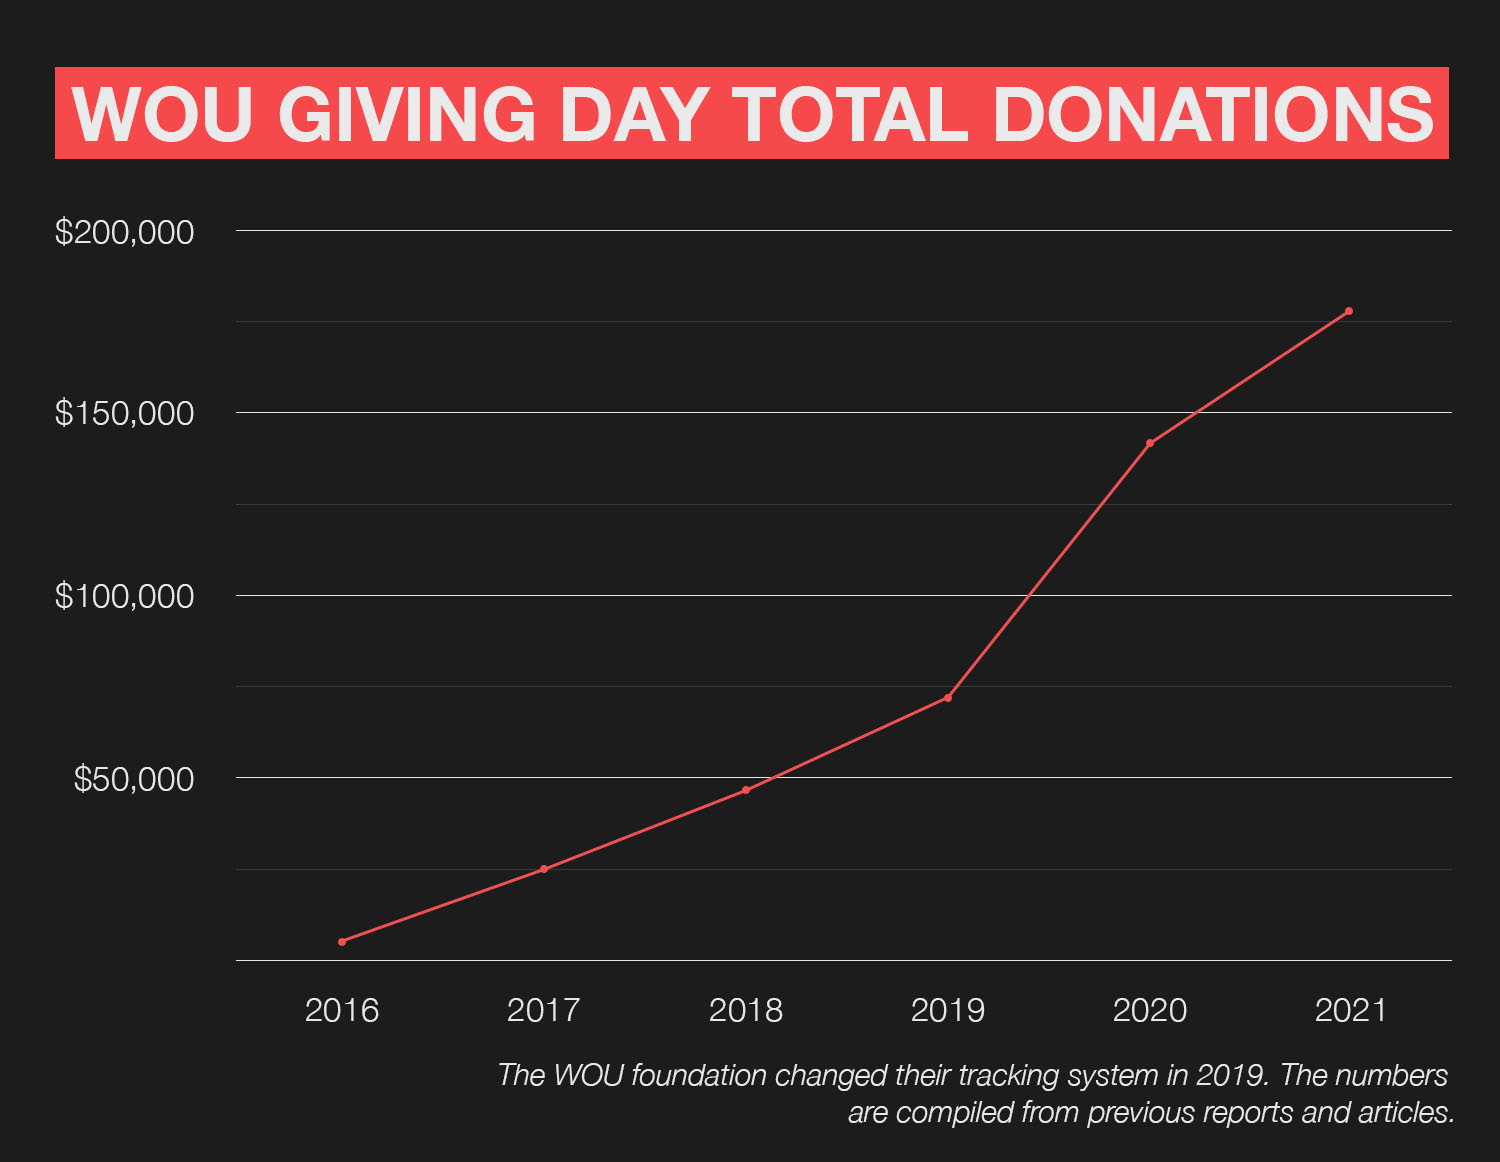 Giving Day continues to draw in donations in 2021